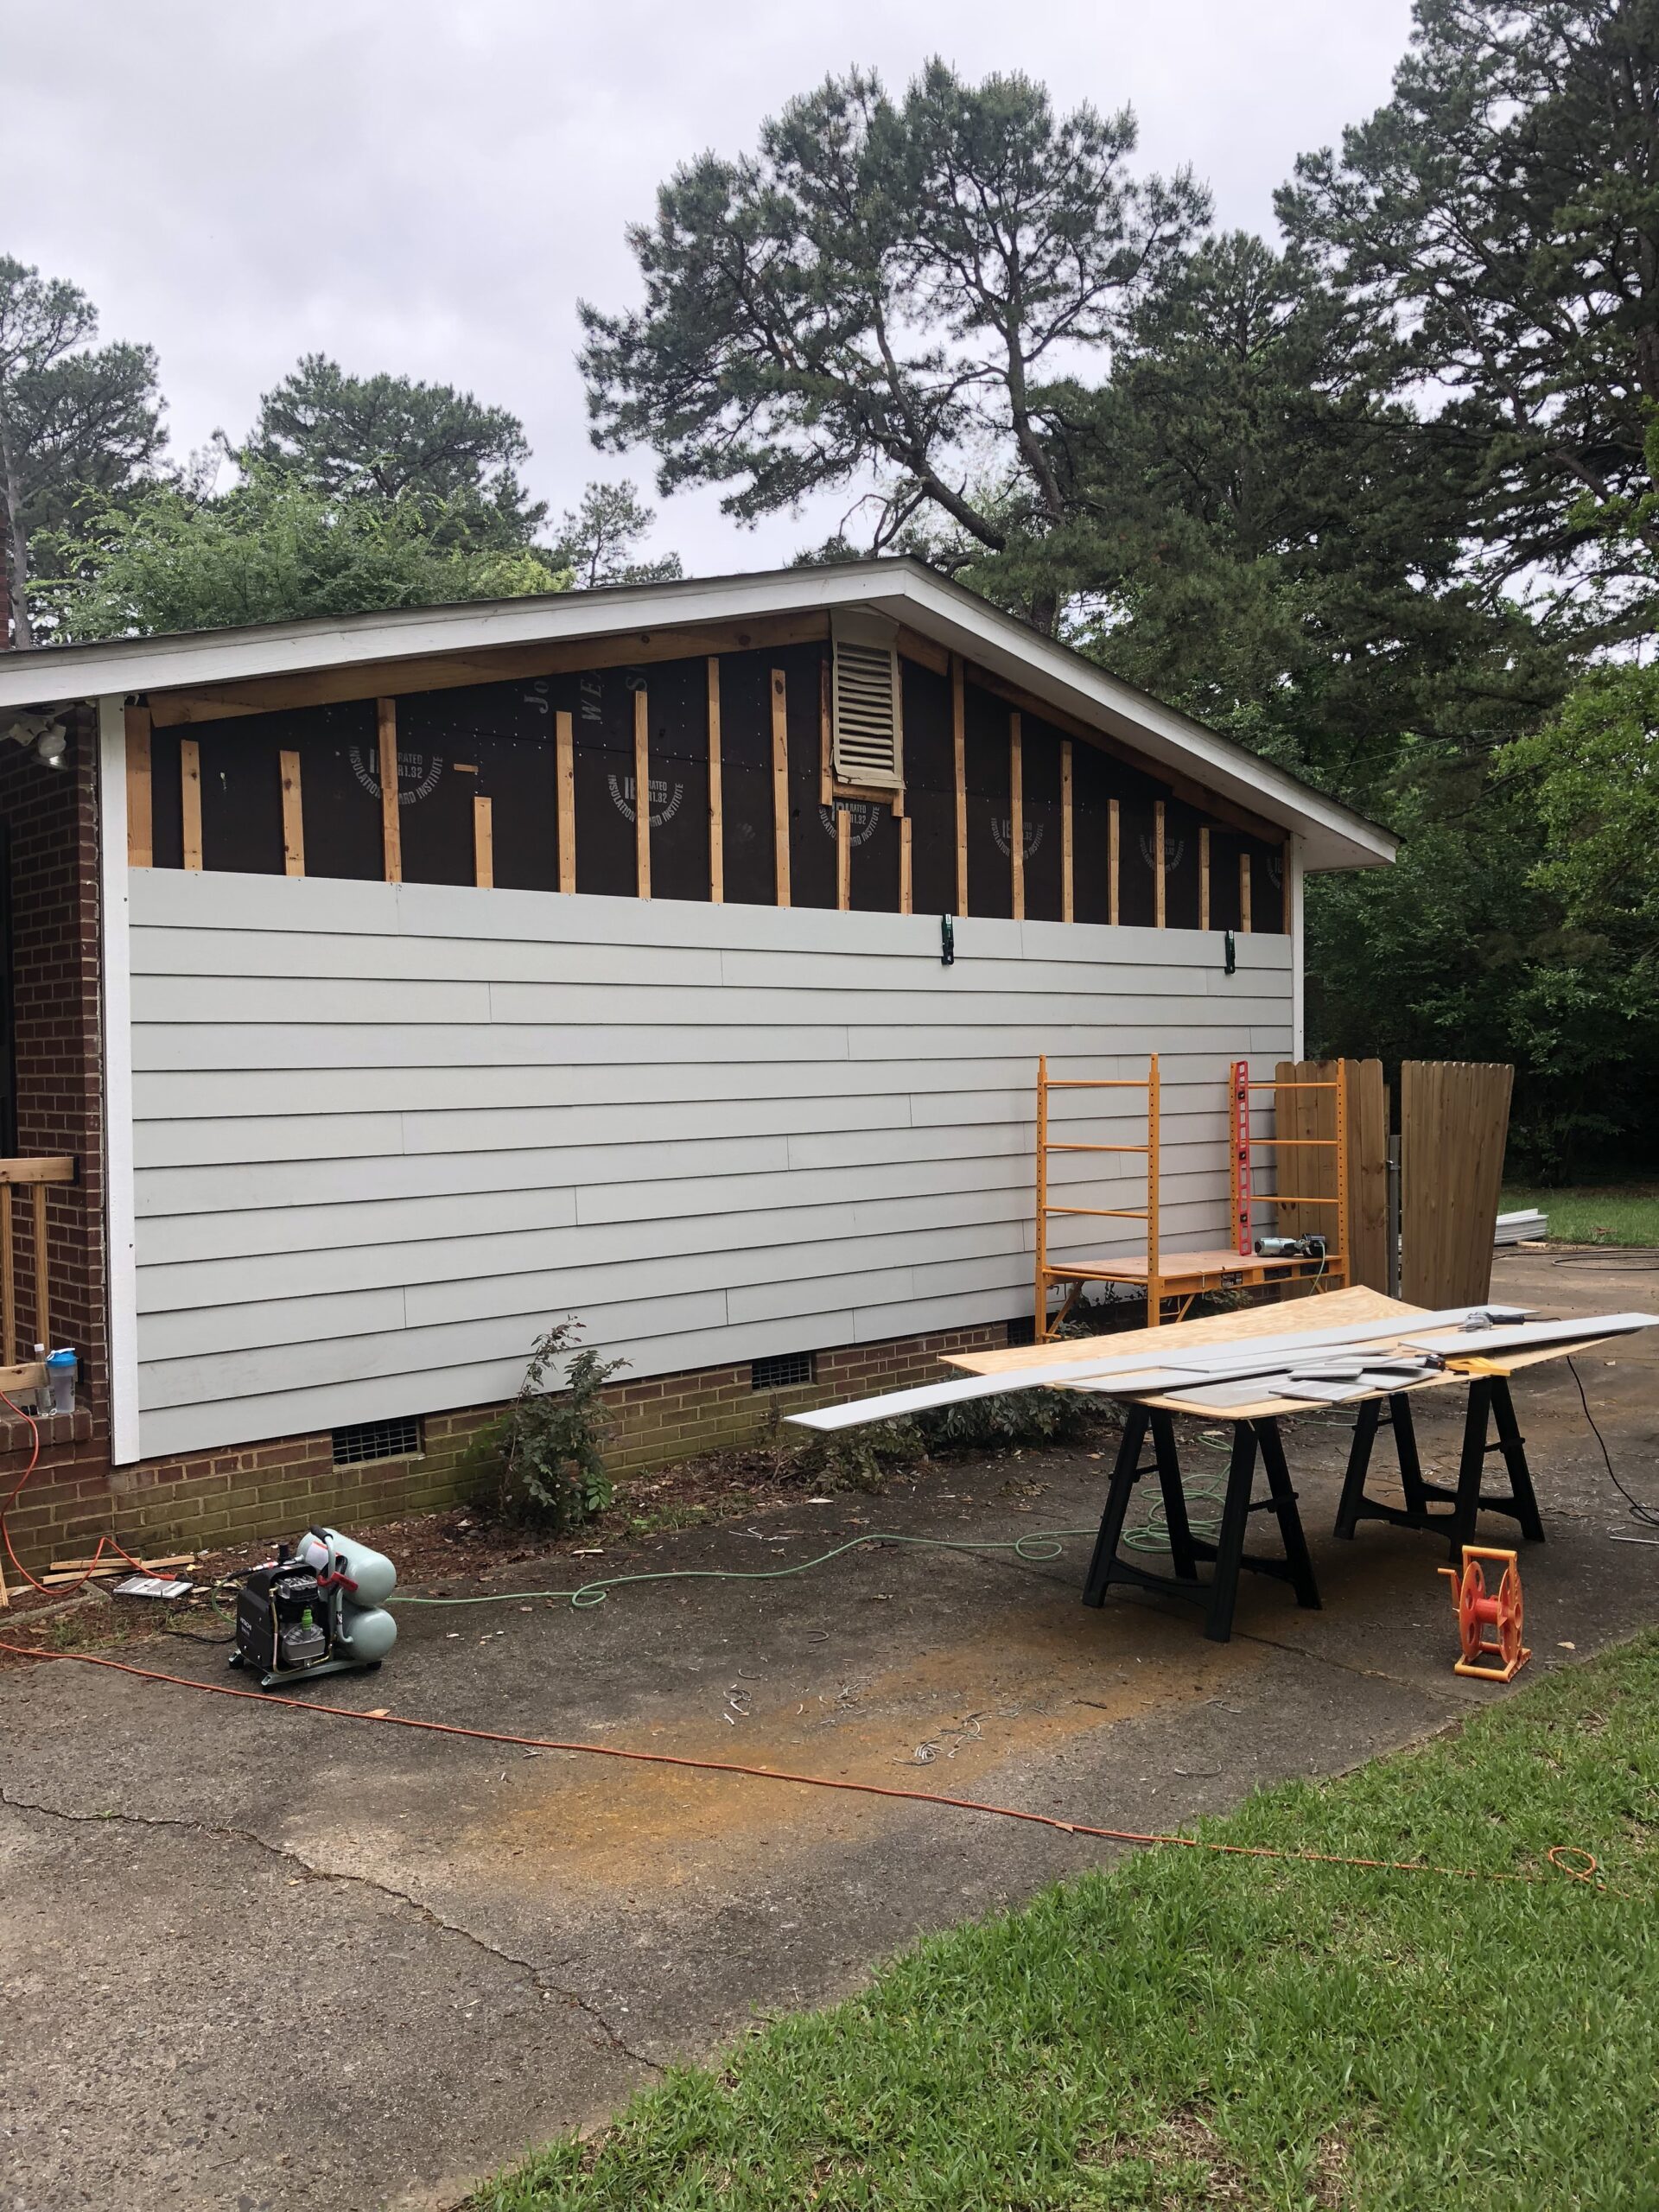 How to Install New Hardie Plank Siding Without Help (DIY Guide)